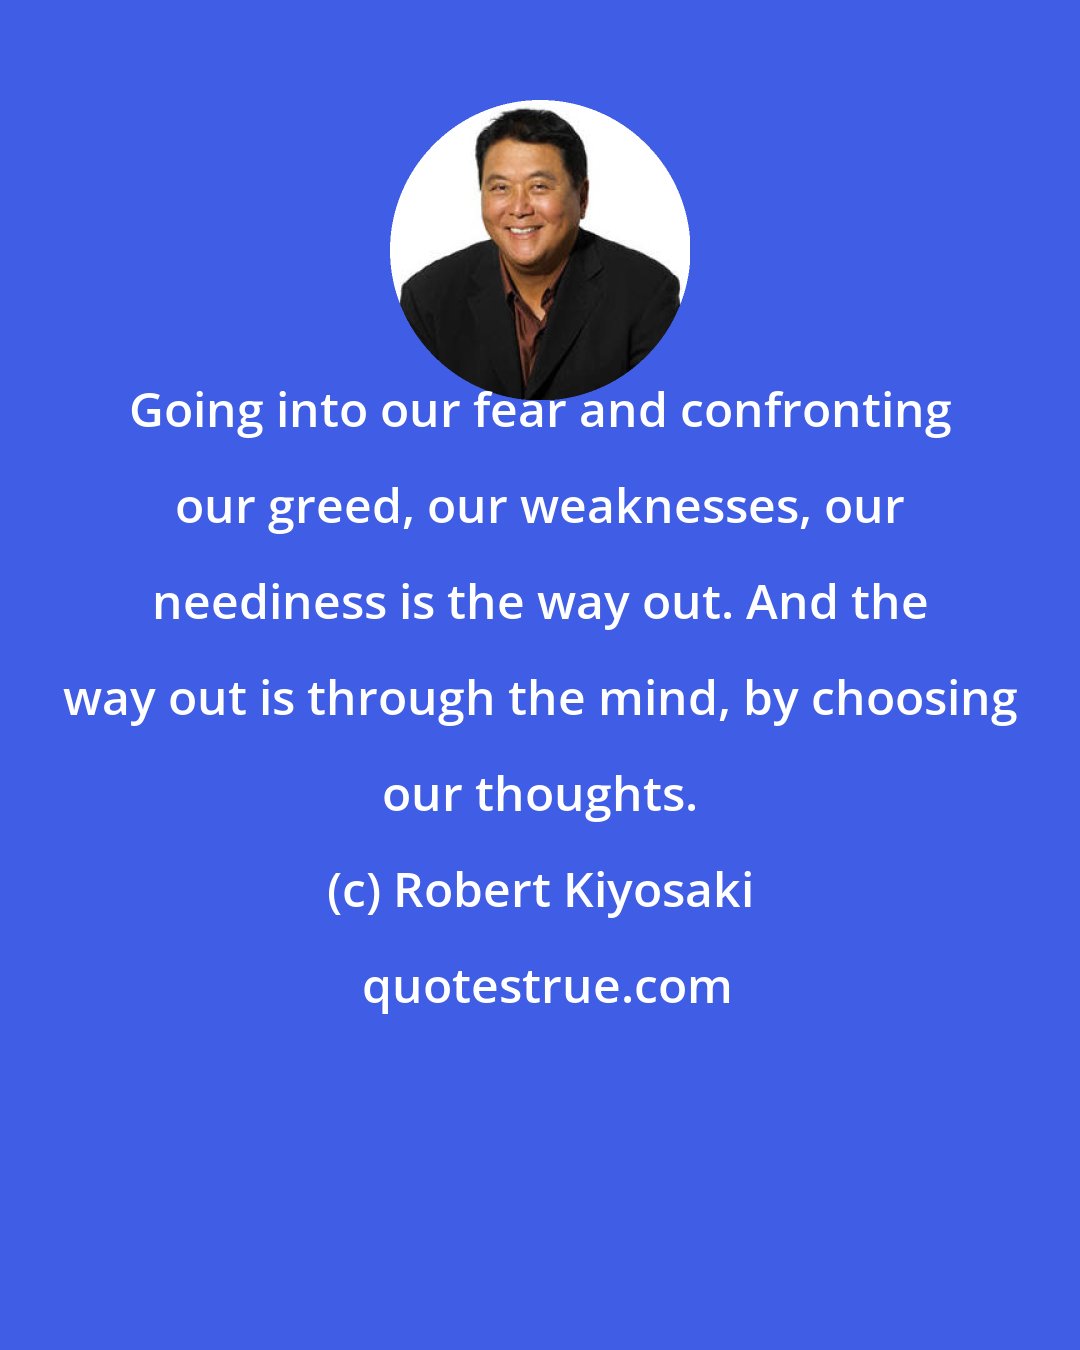 Robert Kiyosaki: Going into our fear and confronting our greed, our weaknesses, our neediness is the way out. And the way out is through the mind, by choosing our thoughts.